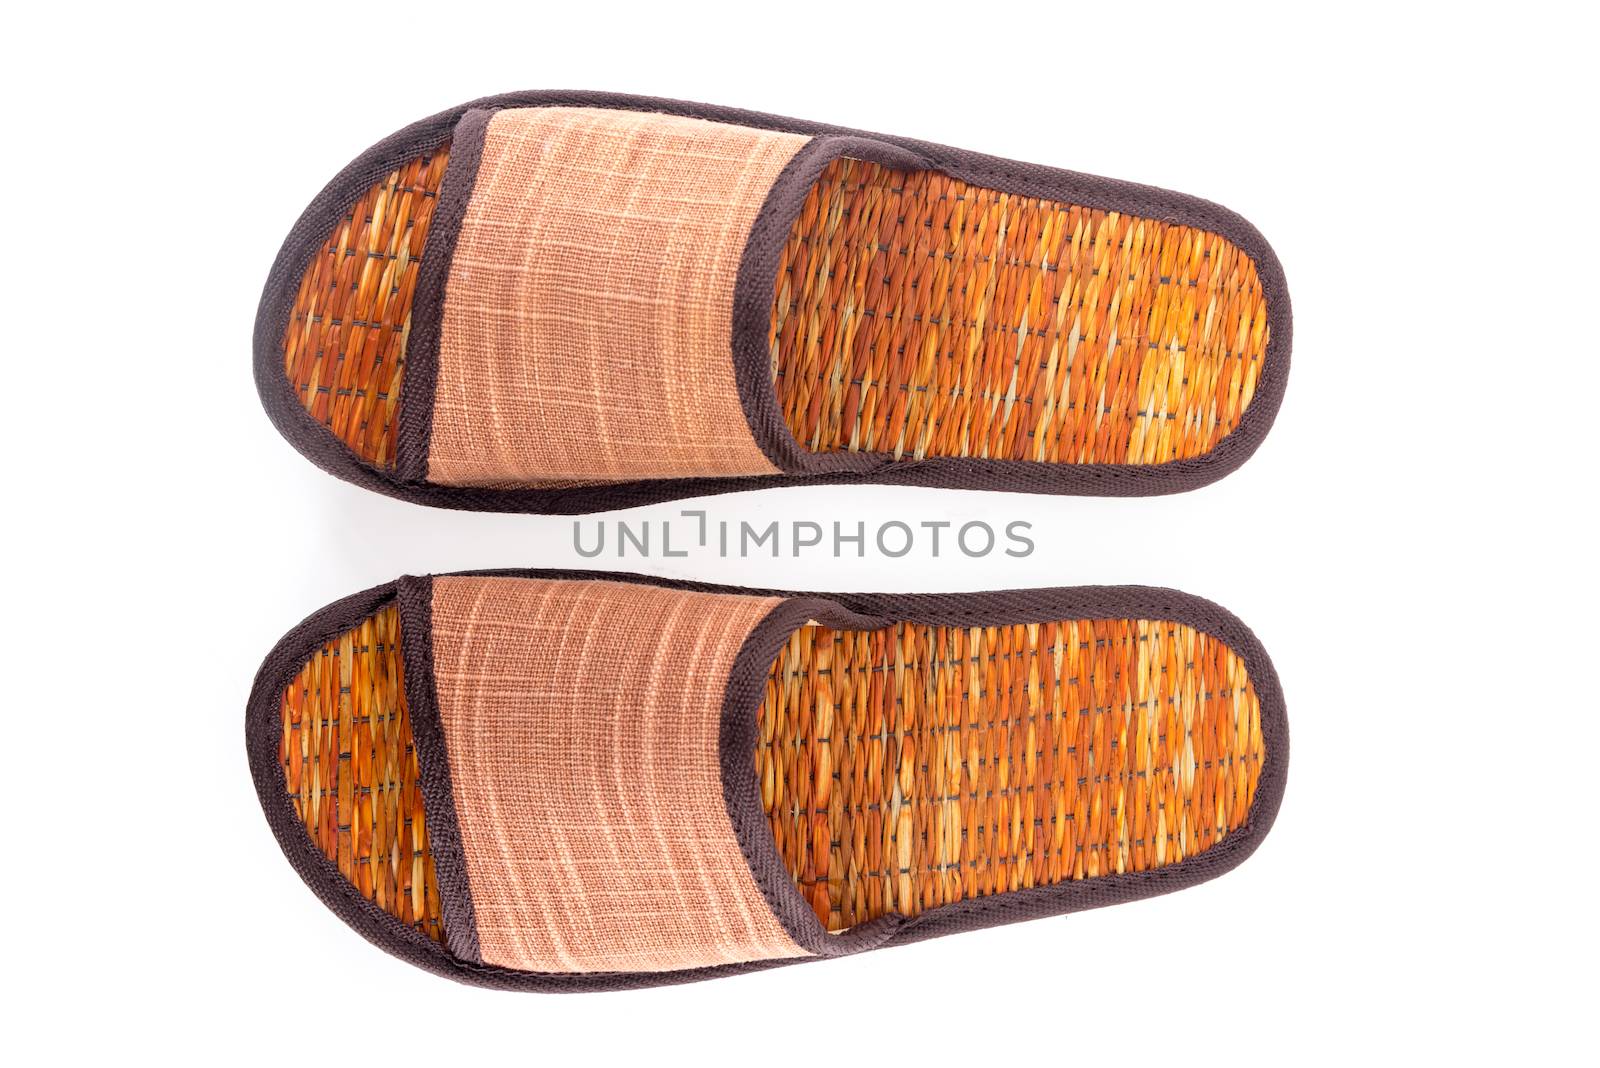 Thai Sandal made from reed plant by iamway